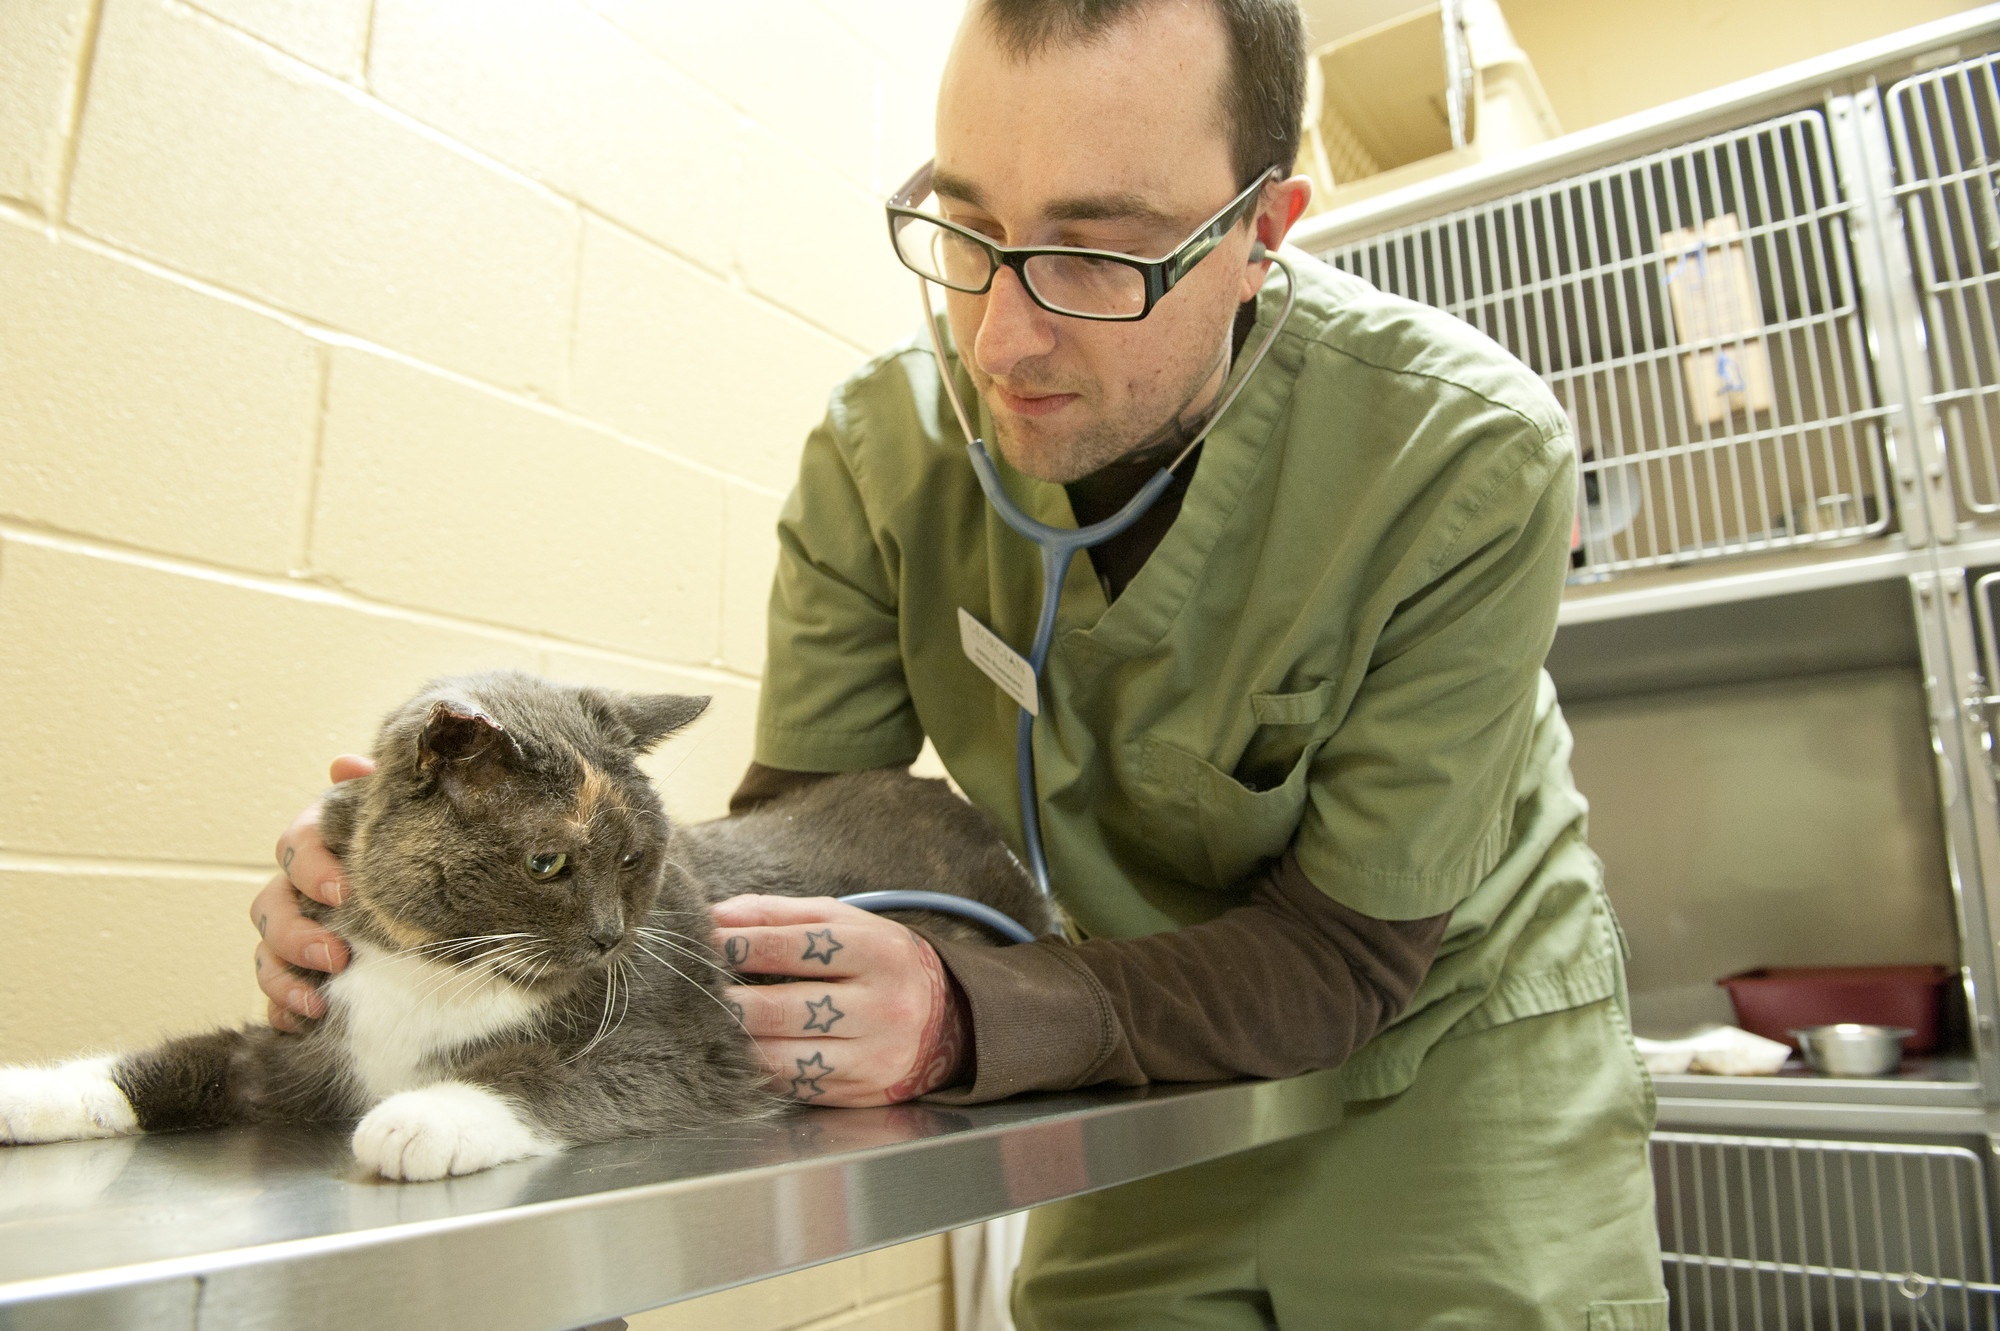 Male vet tech student with cat